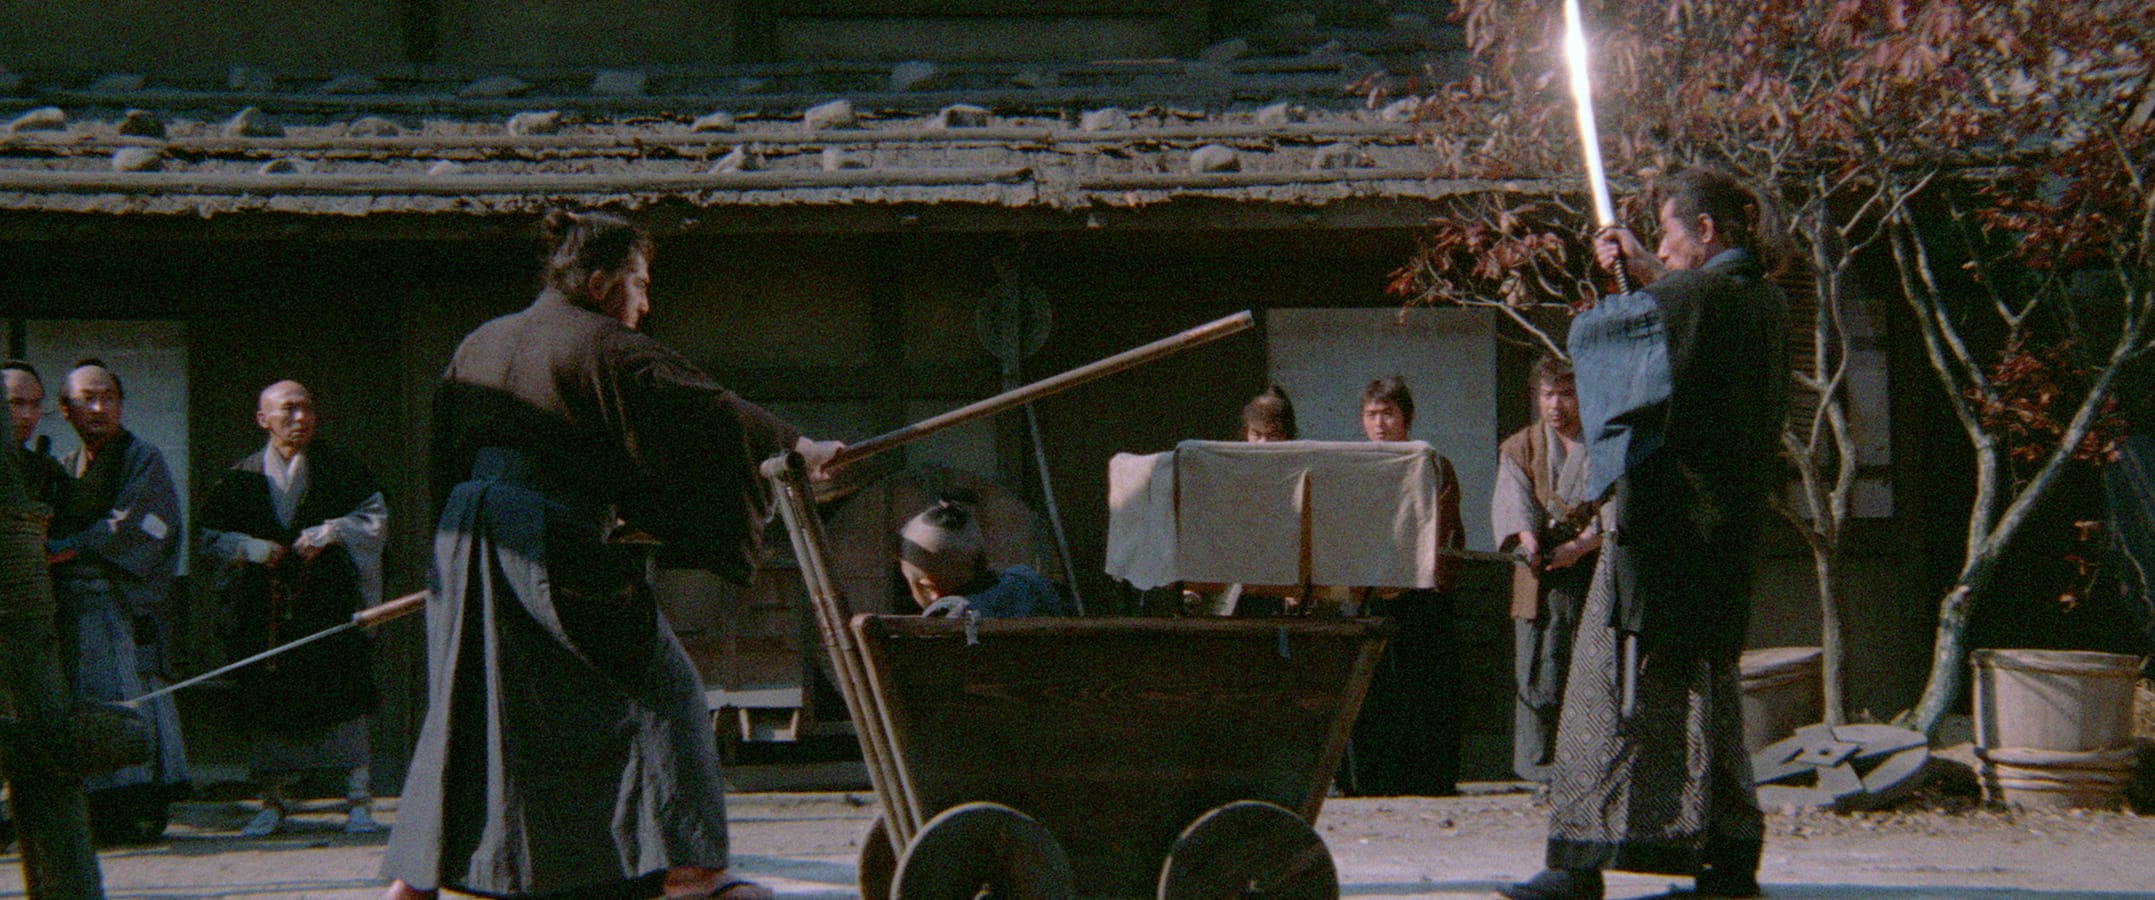 Still from LONE WOLF AND CUB: SWORD OF VENGEANCE (1972)